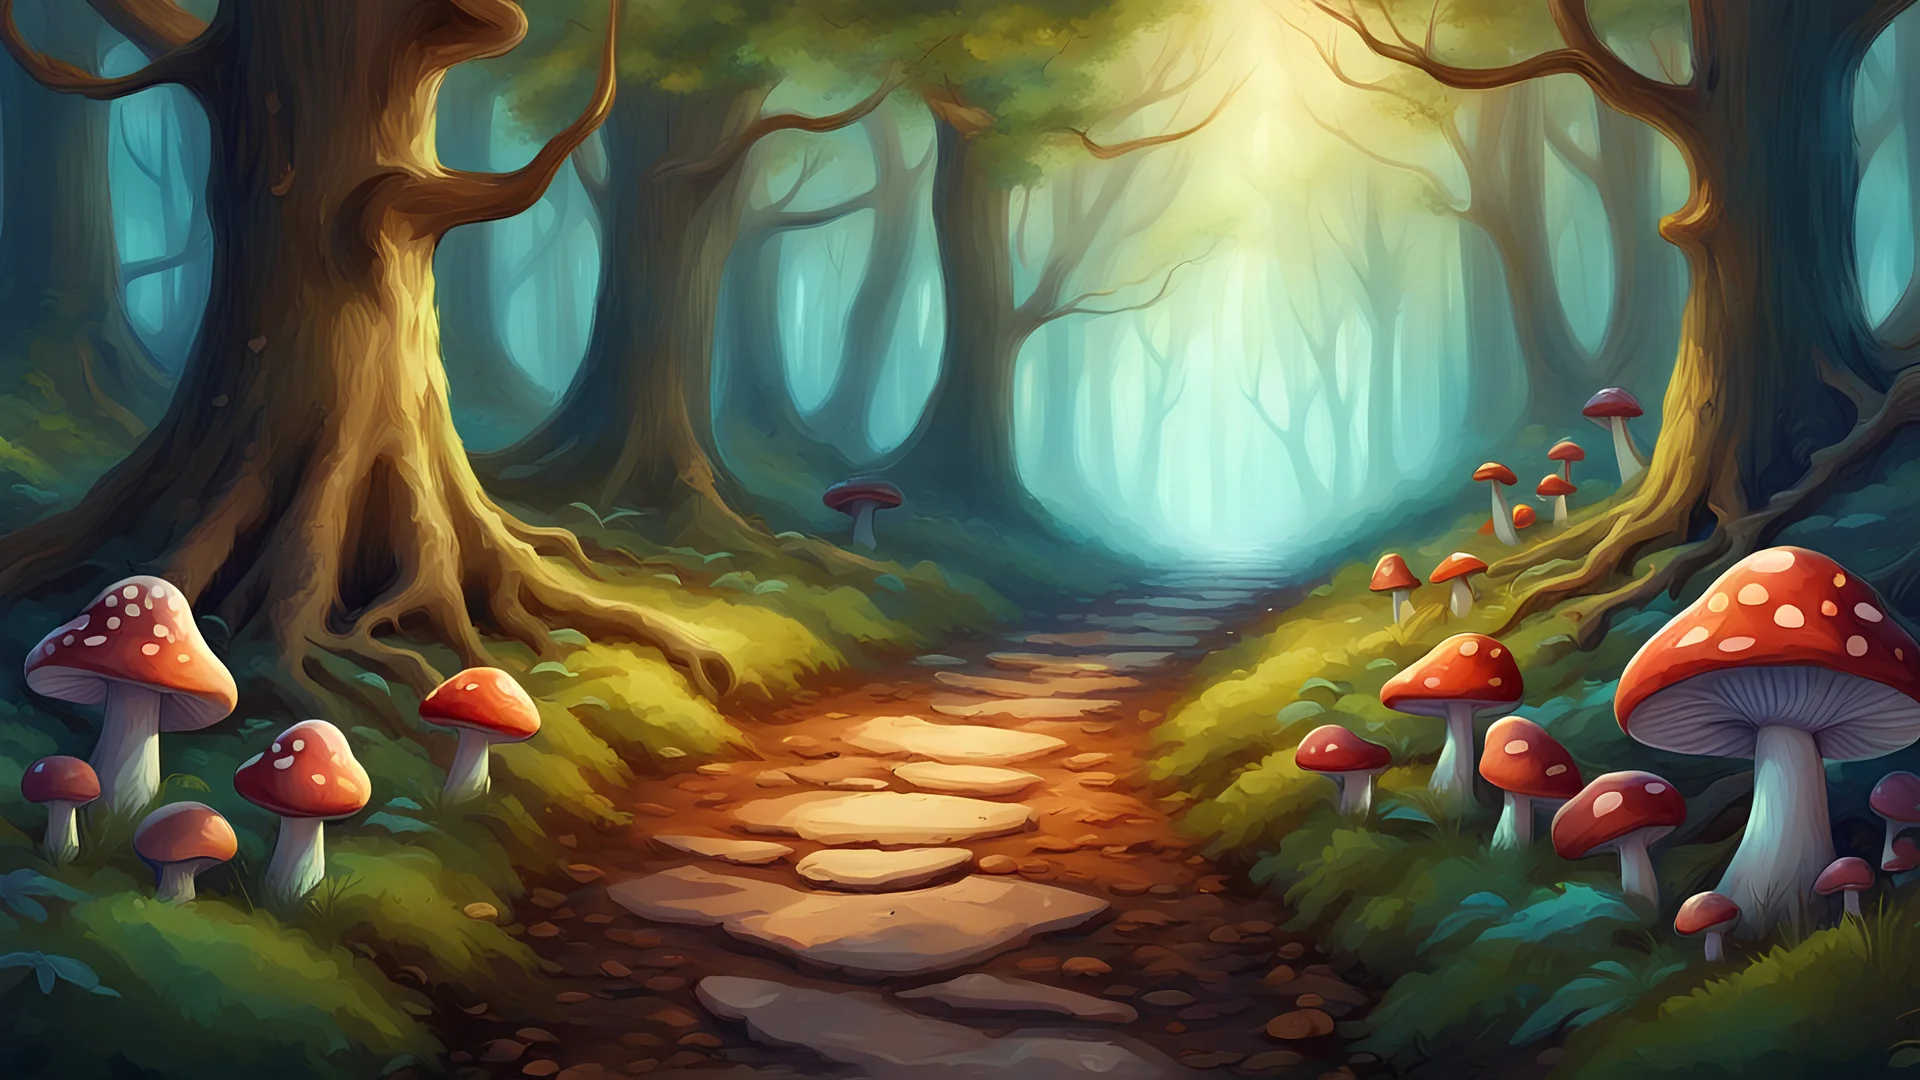 illustration {a scene showing a path leading away from the viewer in a fantasy forest with trees and mushrooms with different colors} digital art, semi-realistic, fantasy, dreamscape